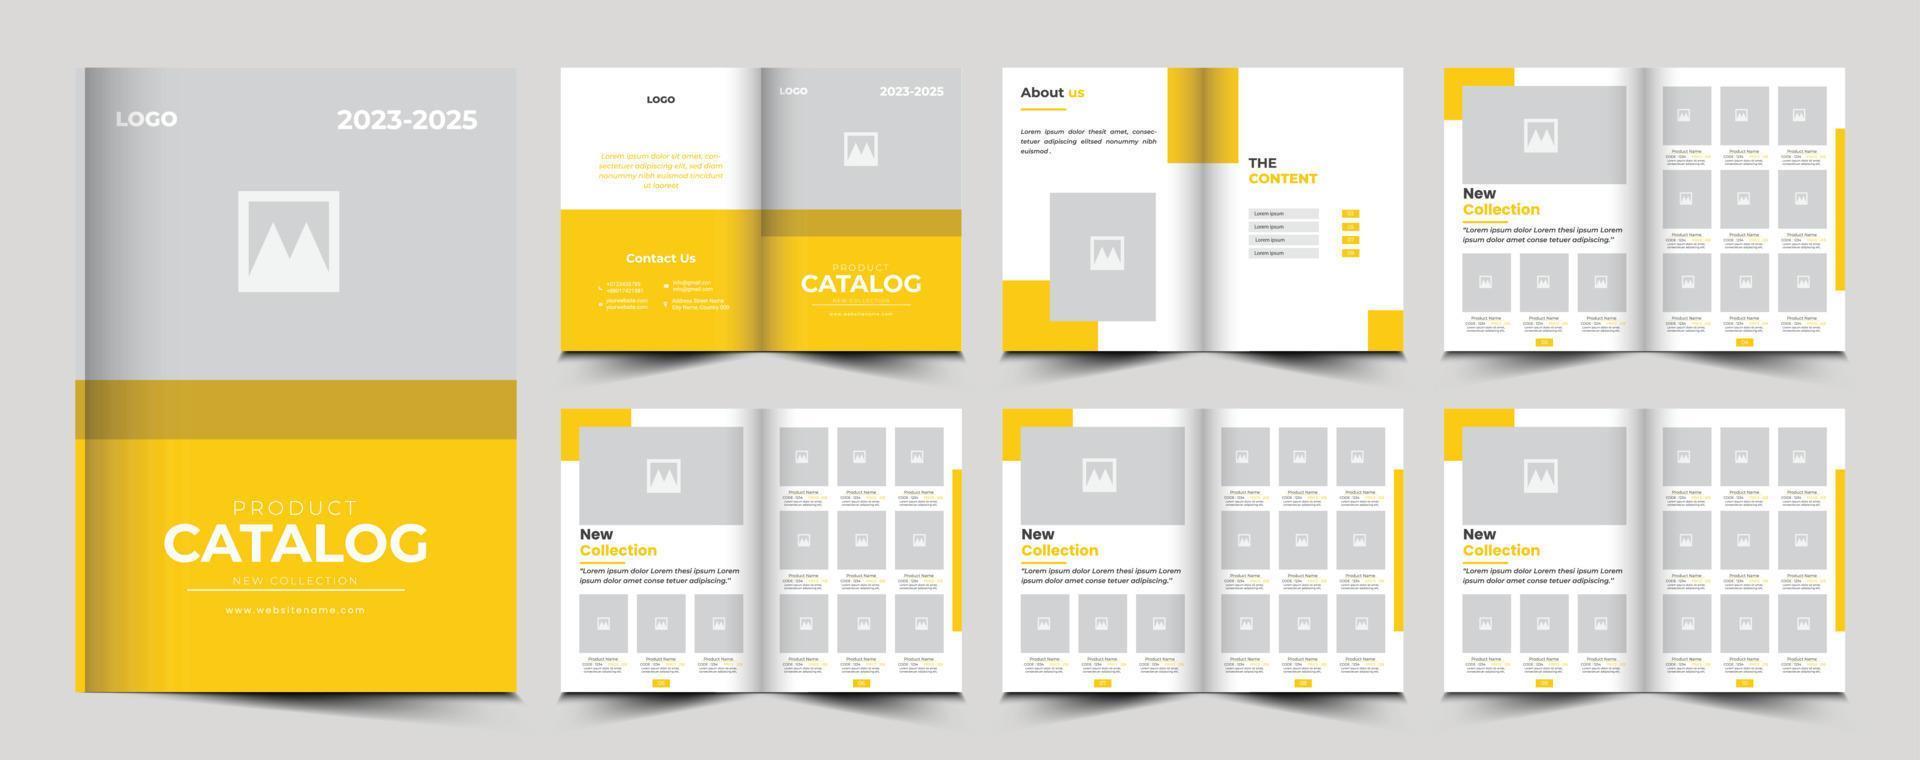 product catalog design template layout or company product catalogue design template vector